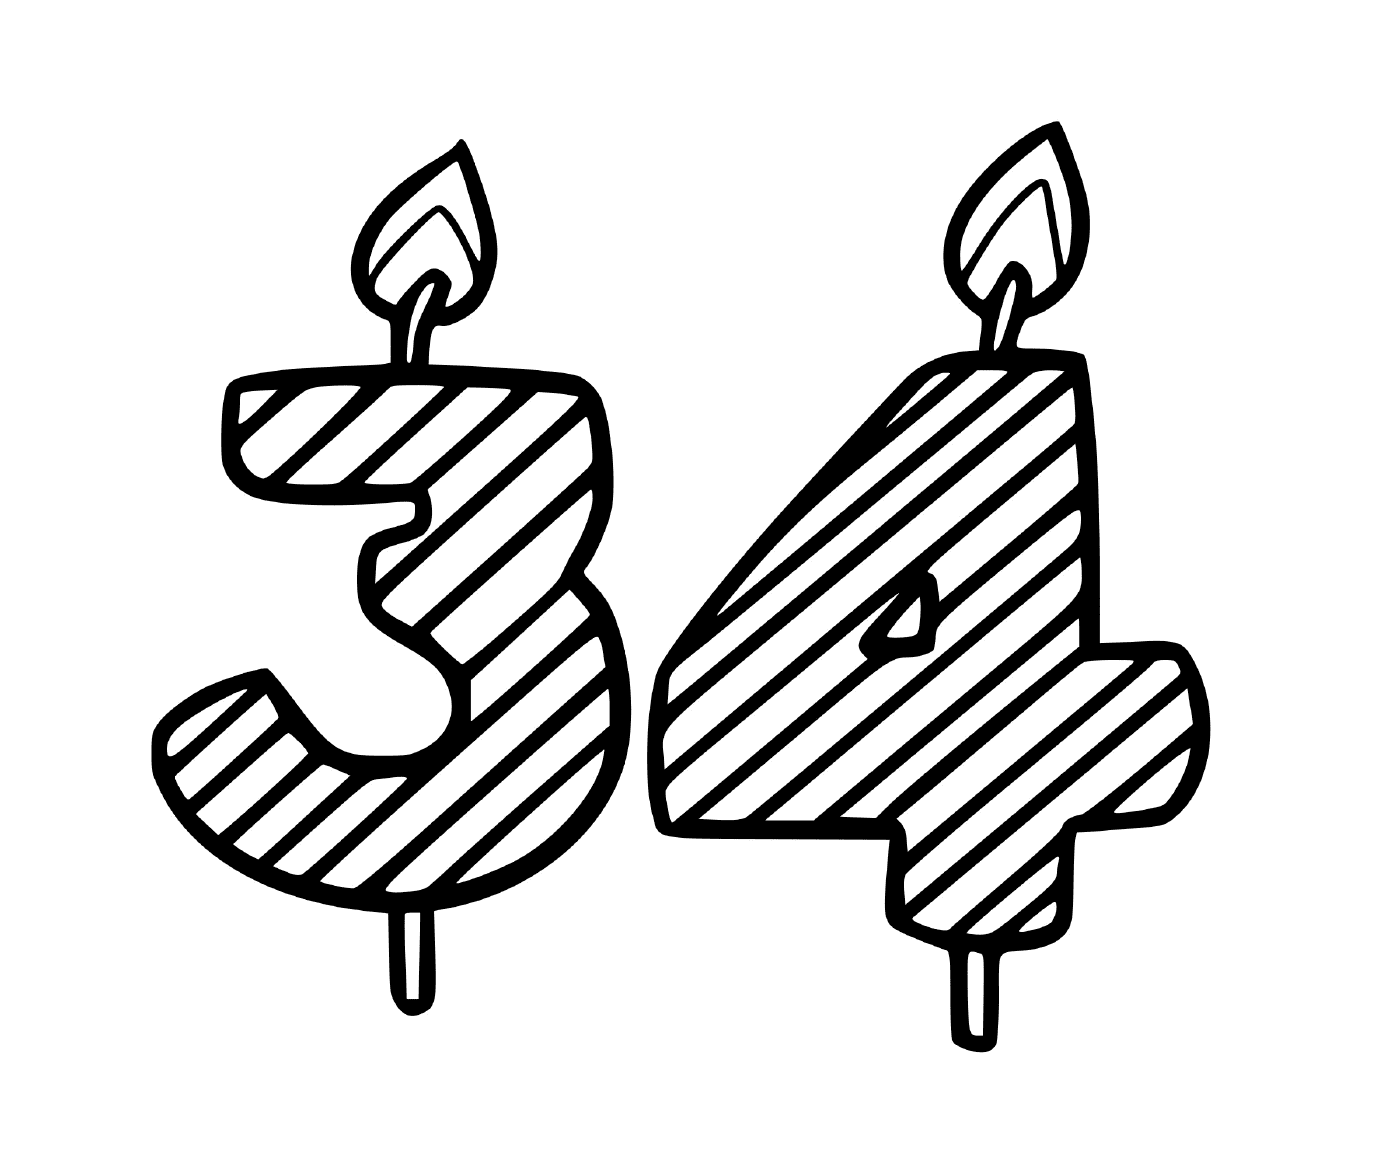  A candle in the shape of the figure 3 4 